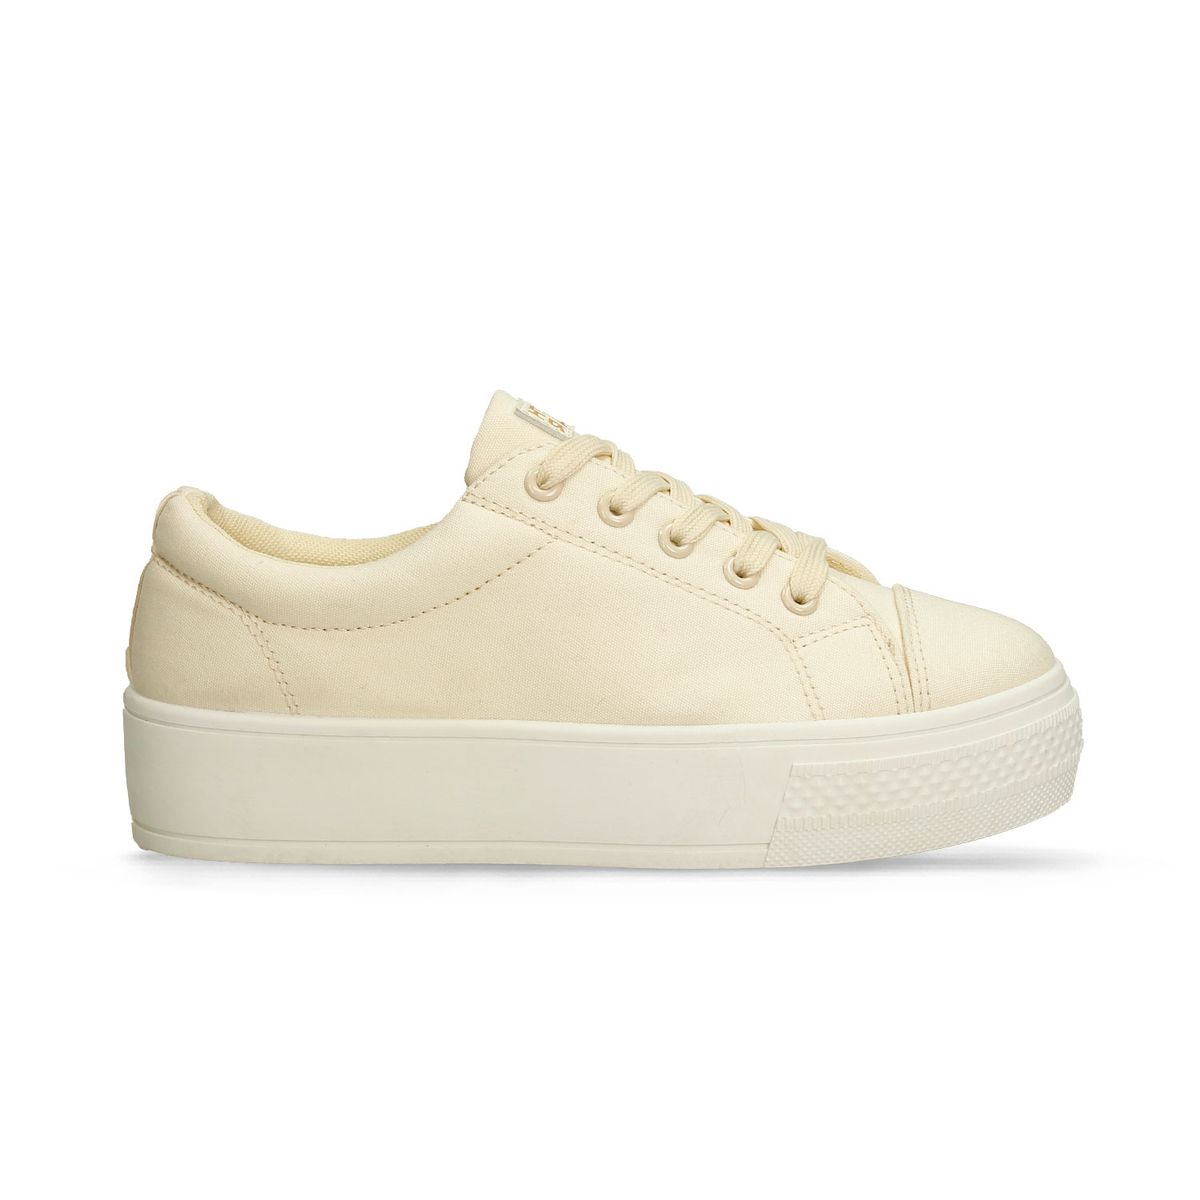 Tenis Casuales Beige North Star Finch Chloe Mujer